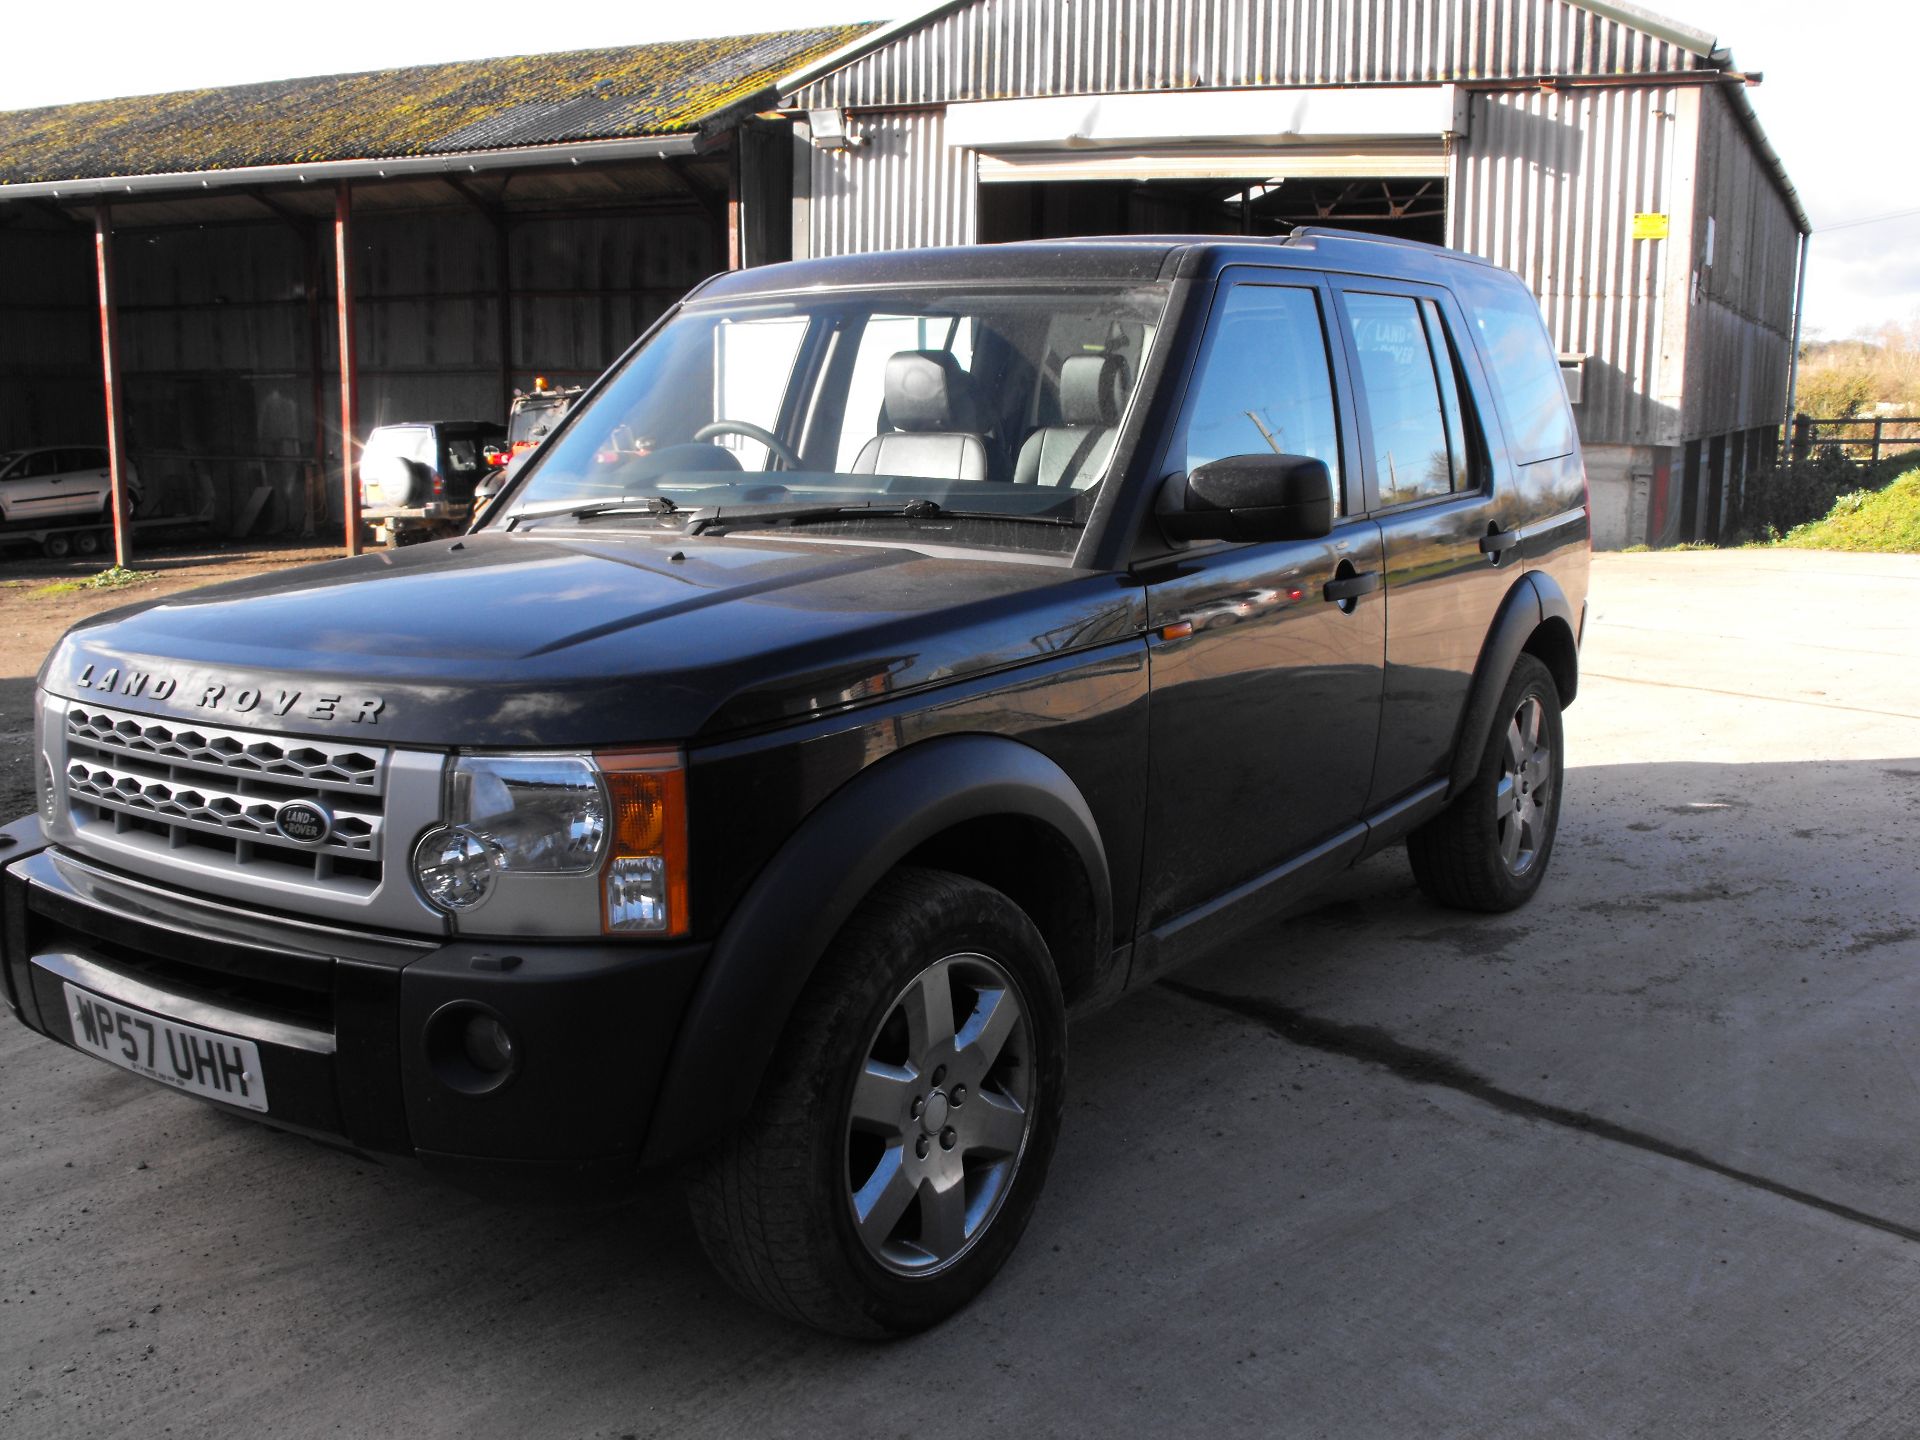 Land Rover Discovery 3 XS TDV6 Auto 2008 - Image 3 of 9